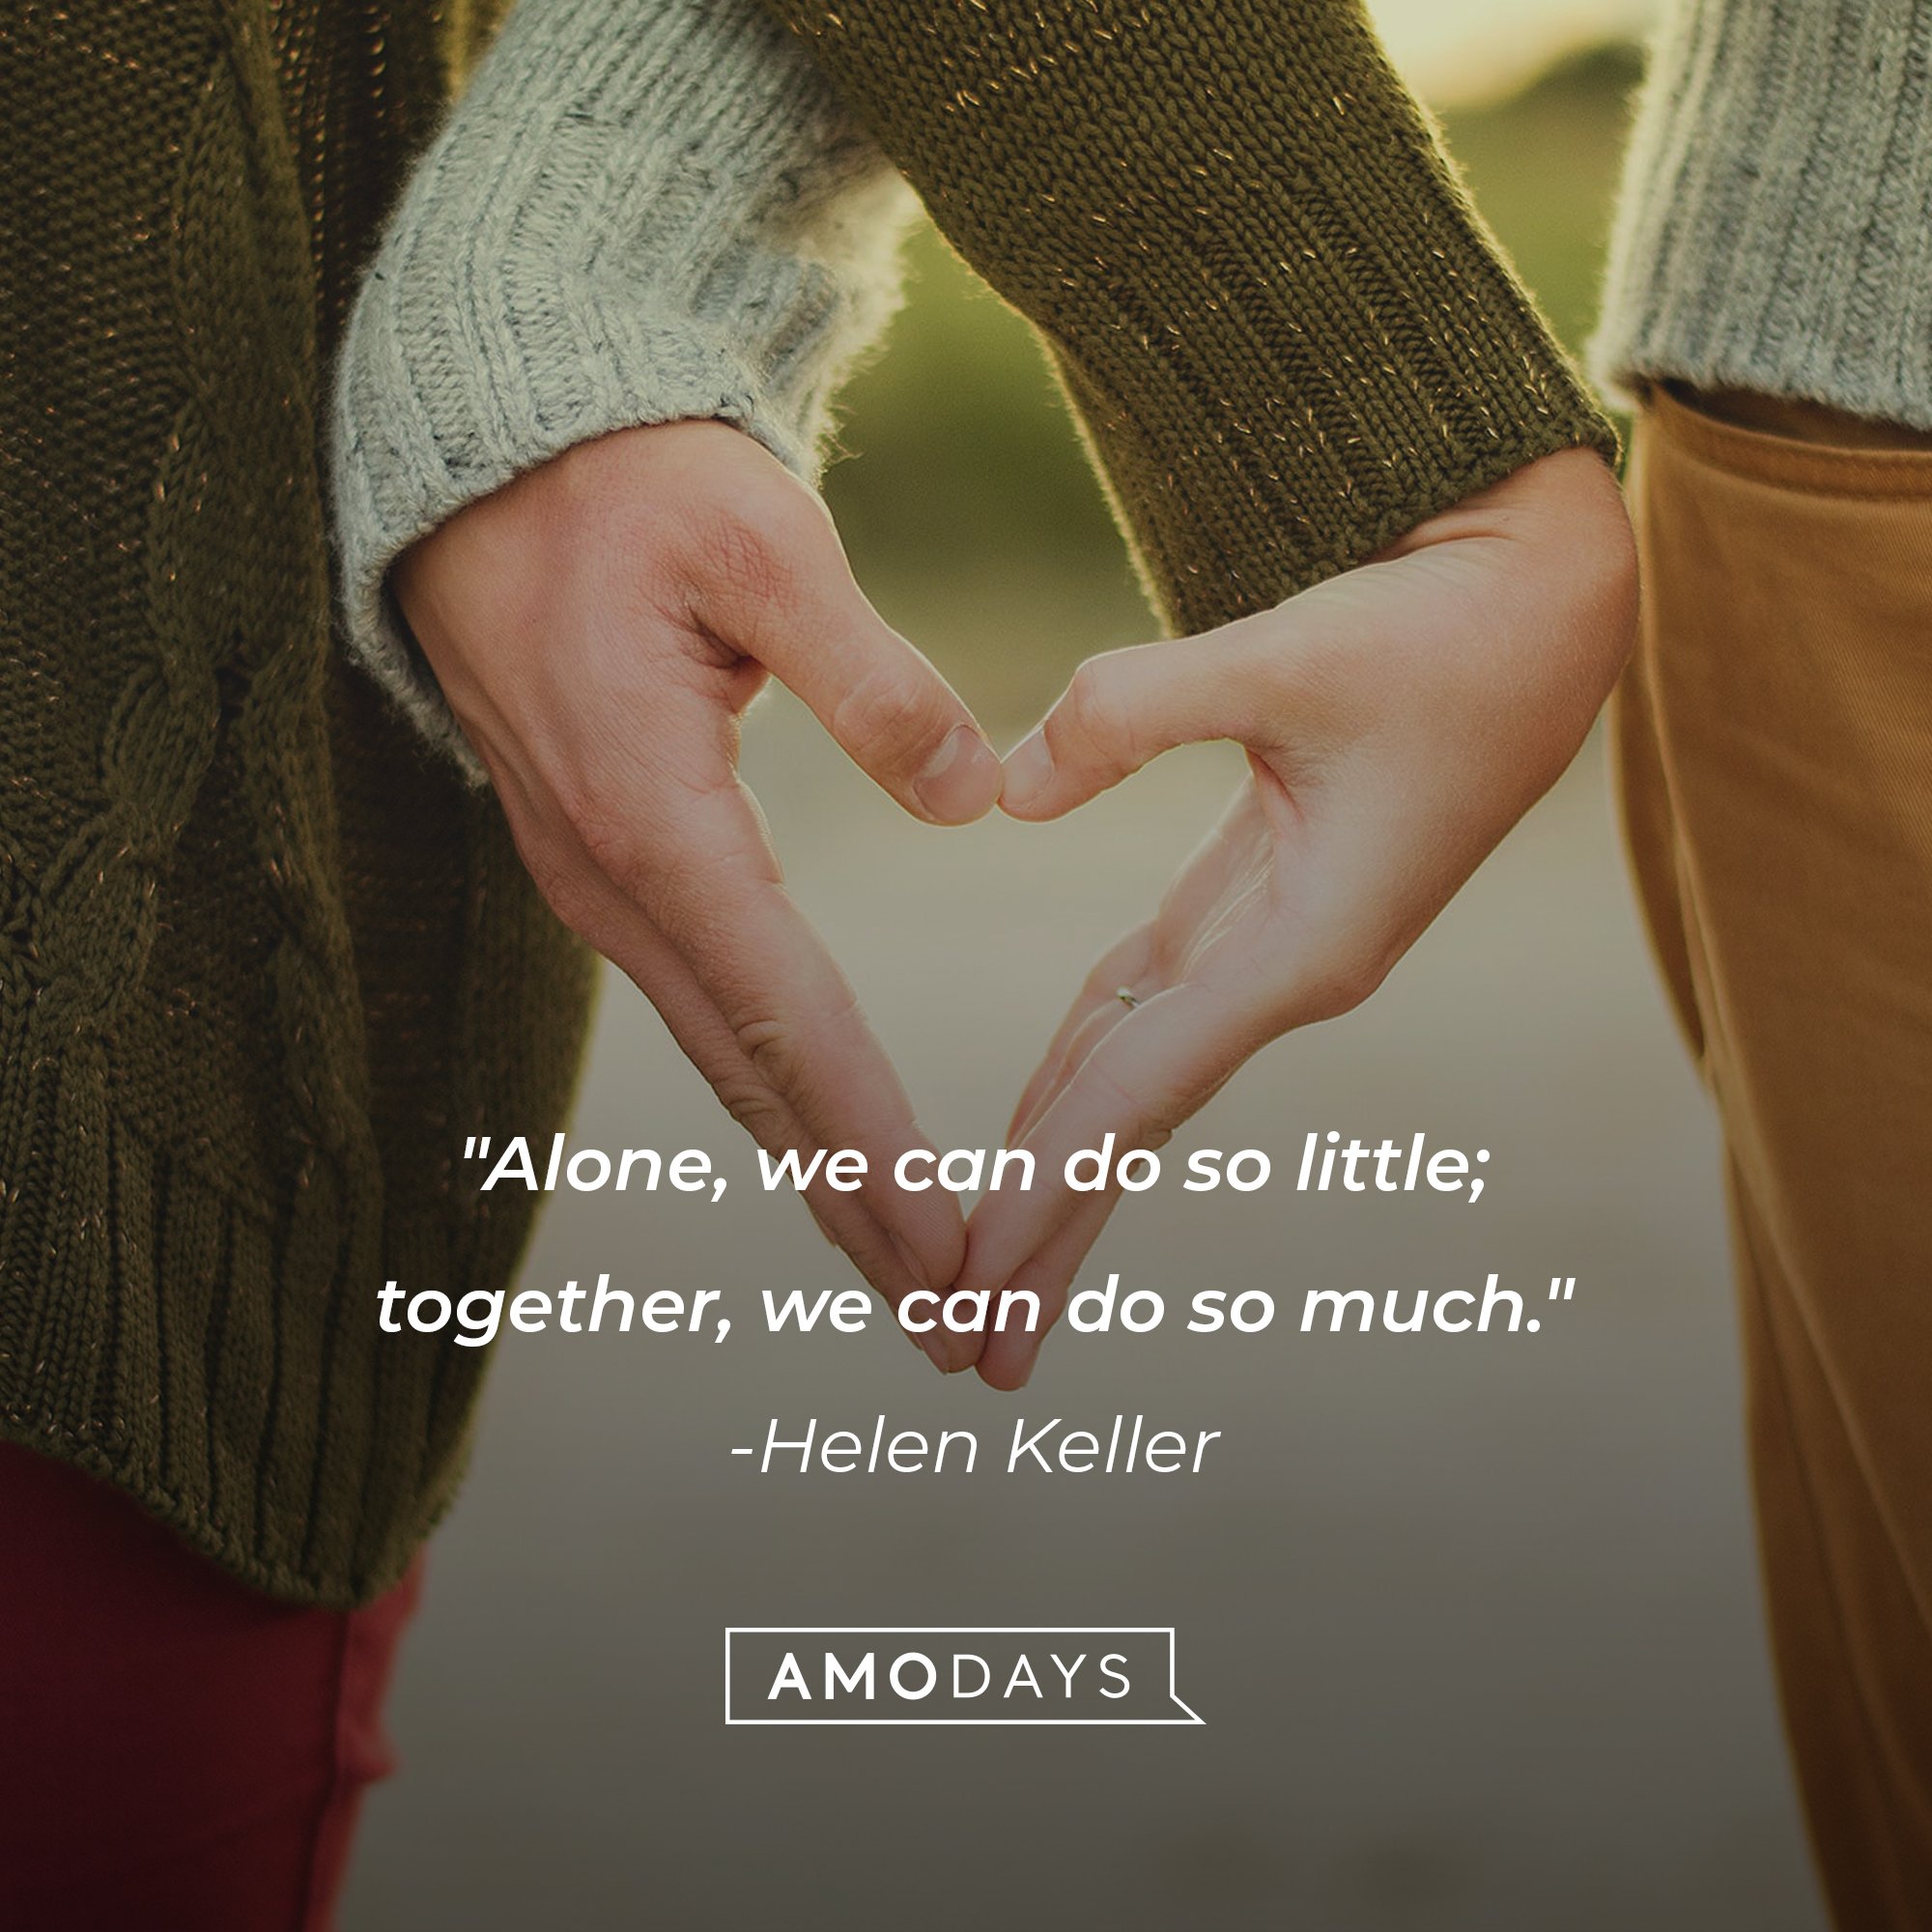 Helen Keller’s quote: "Alone, we can do so little; together, we can do so much." | Image: AmoDays